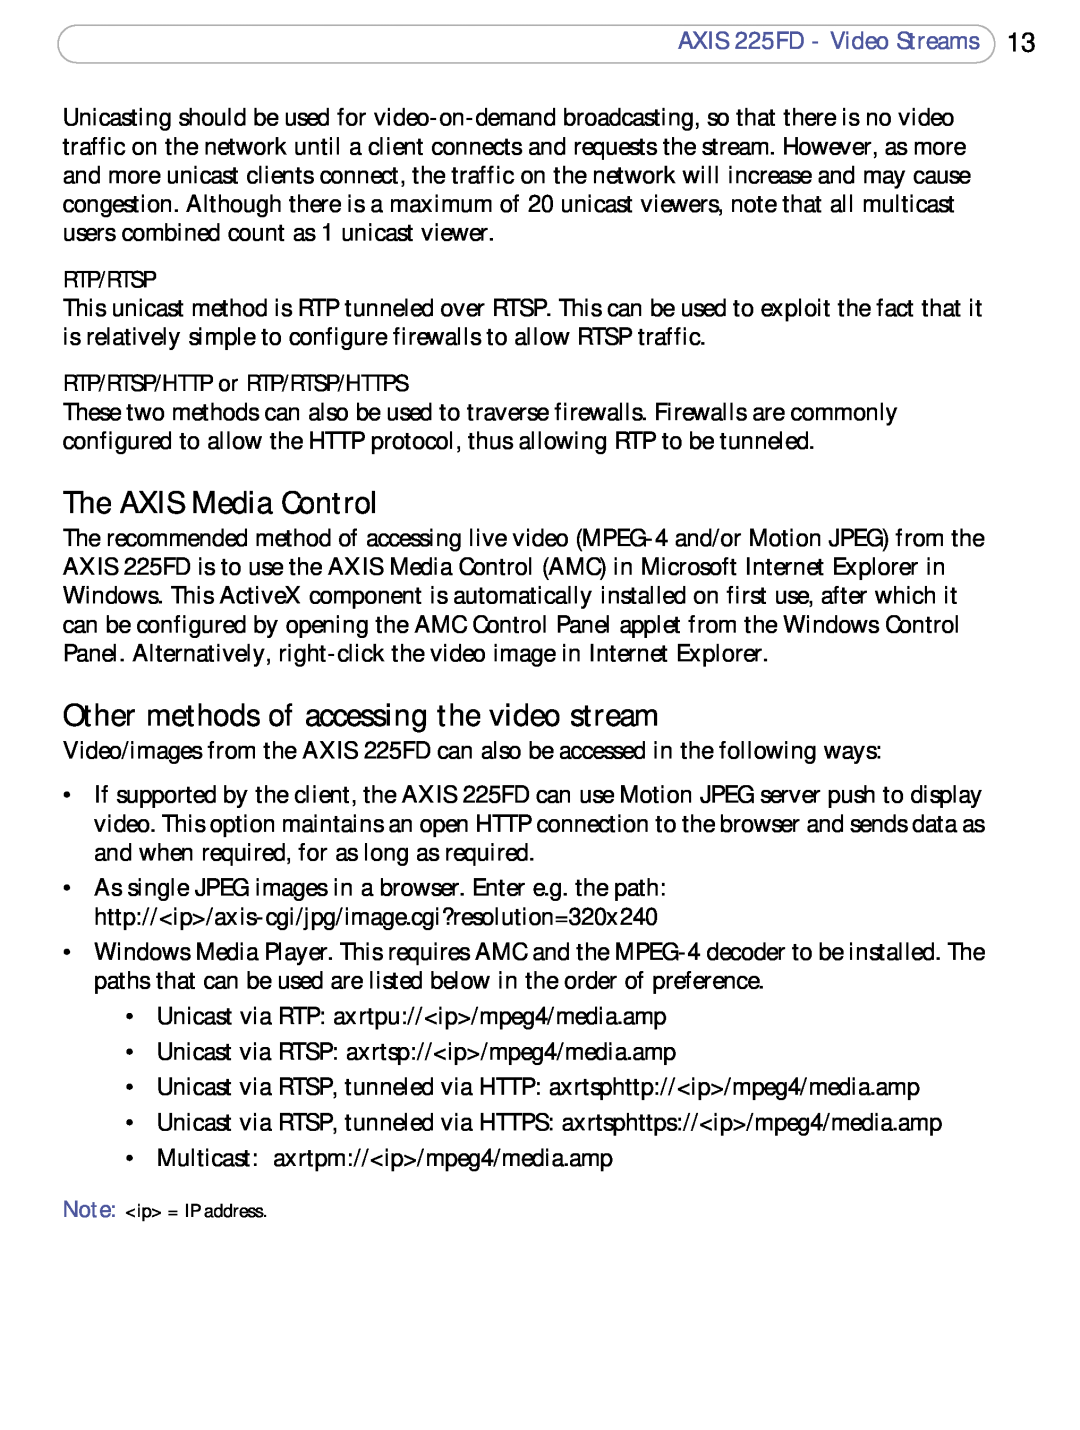 Axis Communications 225FD user manual The AXIS Media Control, Other methods of accessing the video stream, Rtp/Rtsp 